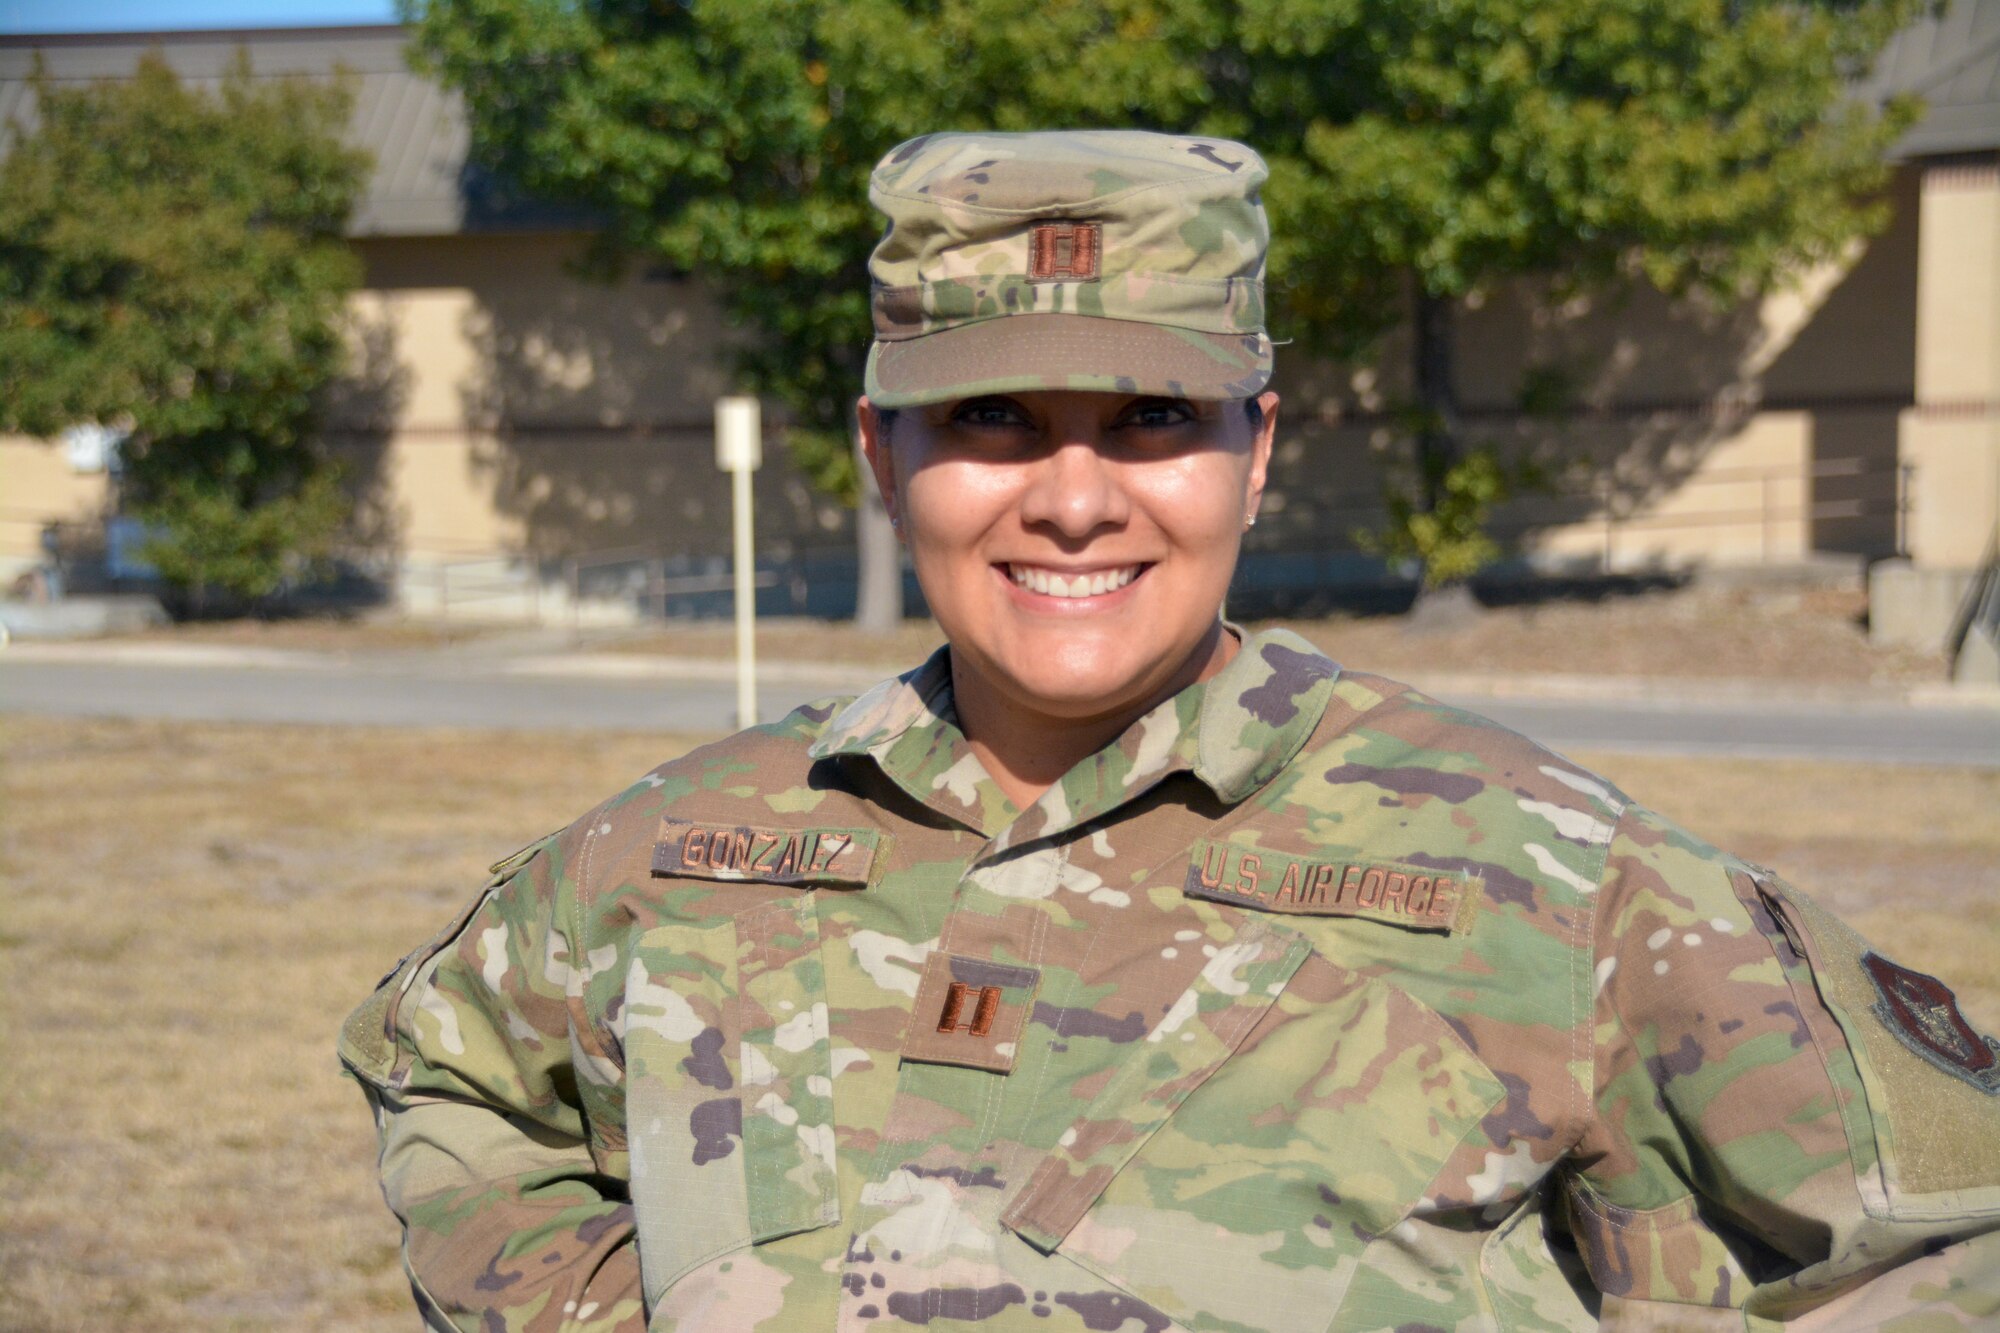 Capt. Jamillah Gonzalez, 960th Cyberspace Wing executive officer, stands for a photograph Nov. 5, 2020, at Joint Base San Antonio-Chapman Training Annex, Texas. (U.S. Air Force photo by Samantha Mathison)